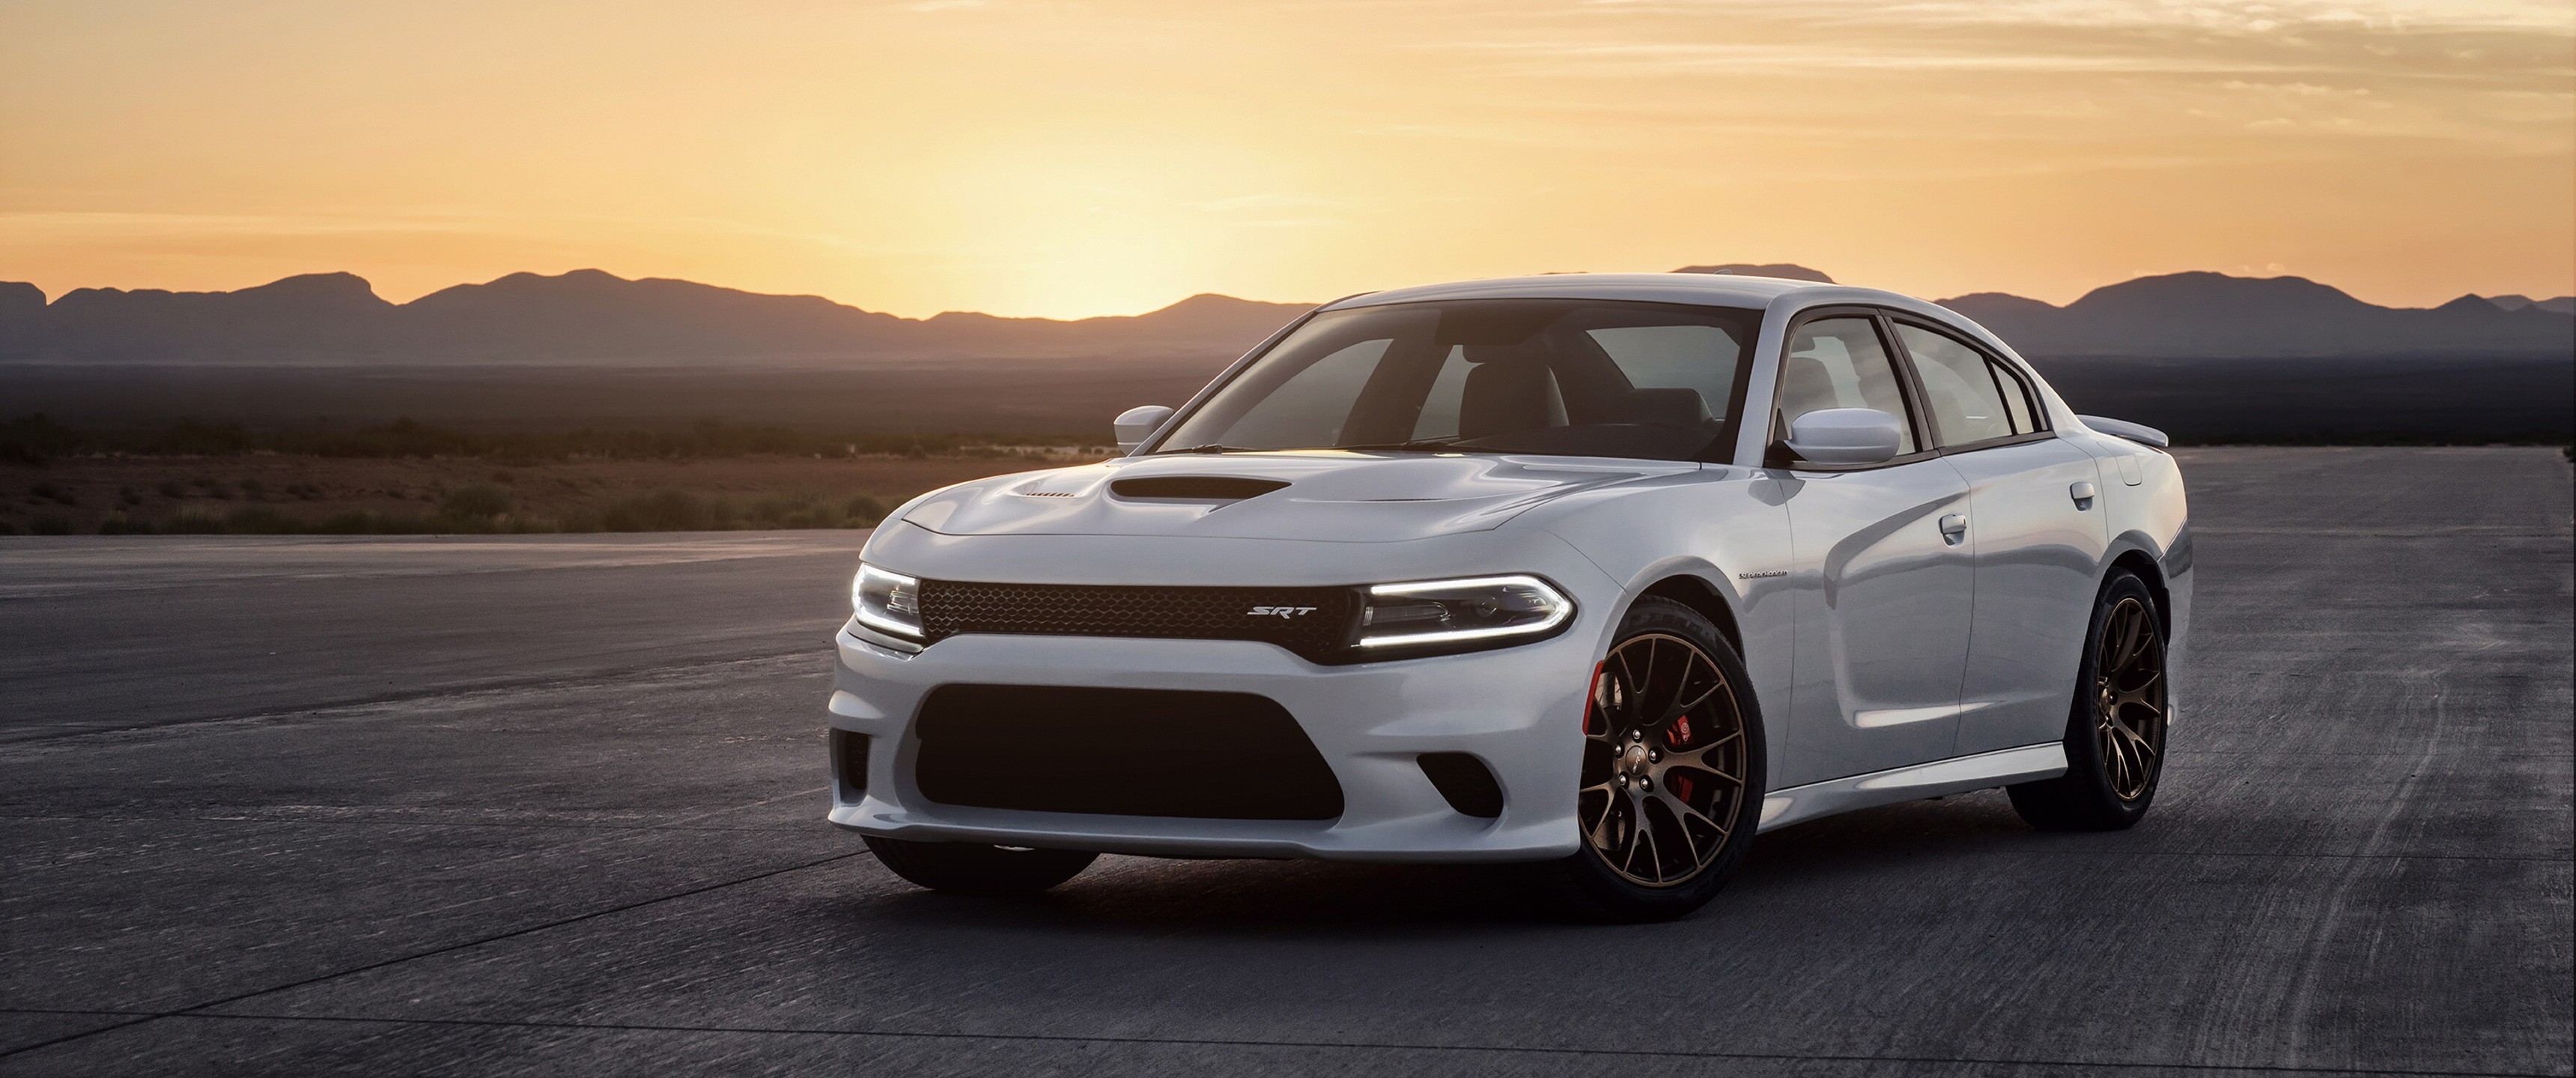 Dodge Tumblr  Dodge charger hellcat Dodge muscle cars Custom muscle cars